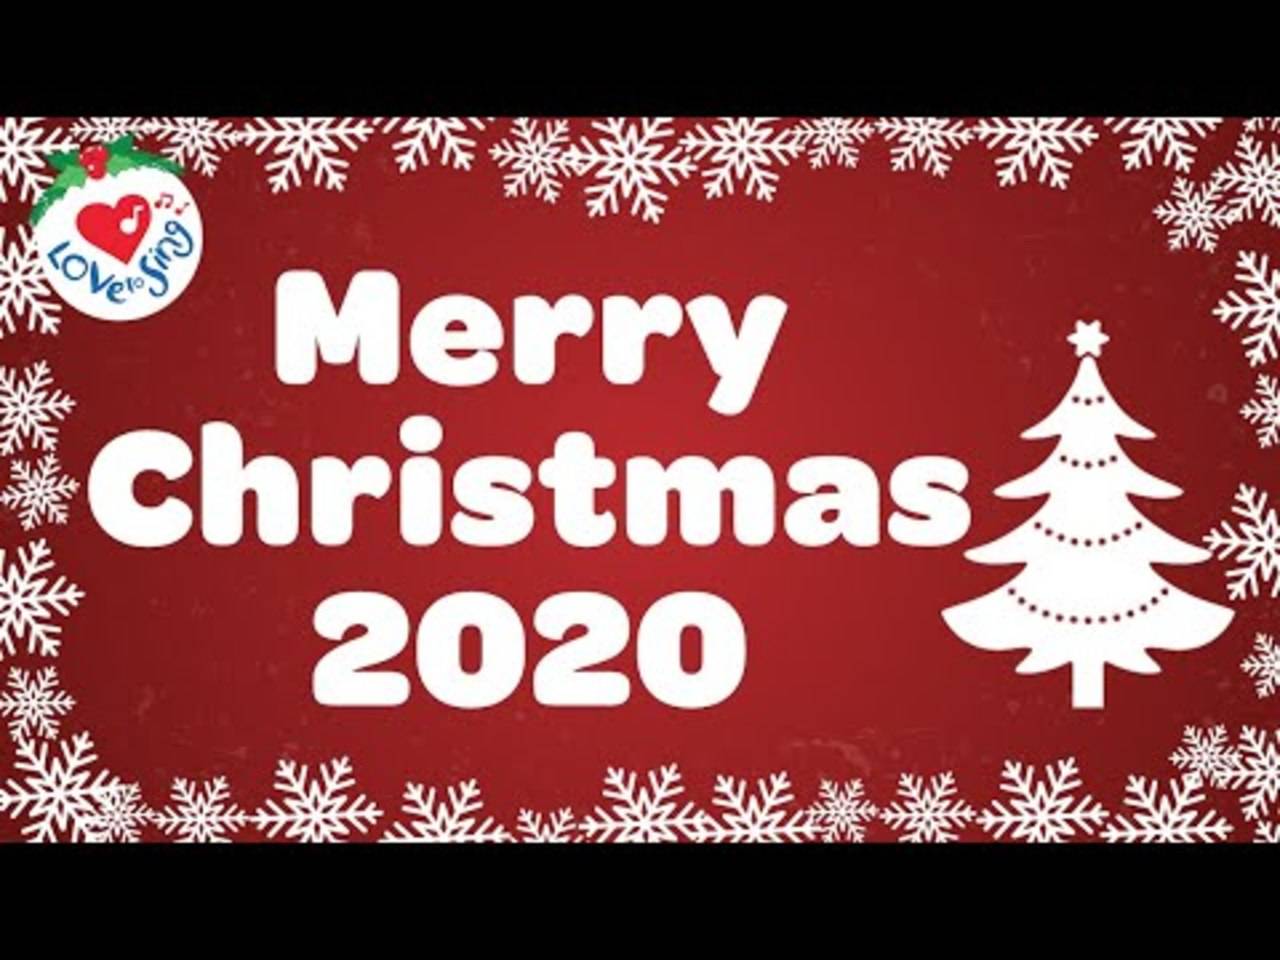 Top Christmas Songs Playlist | Merry Christmas 2020 | Best ...